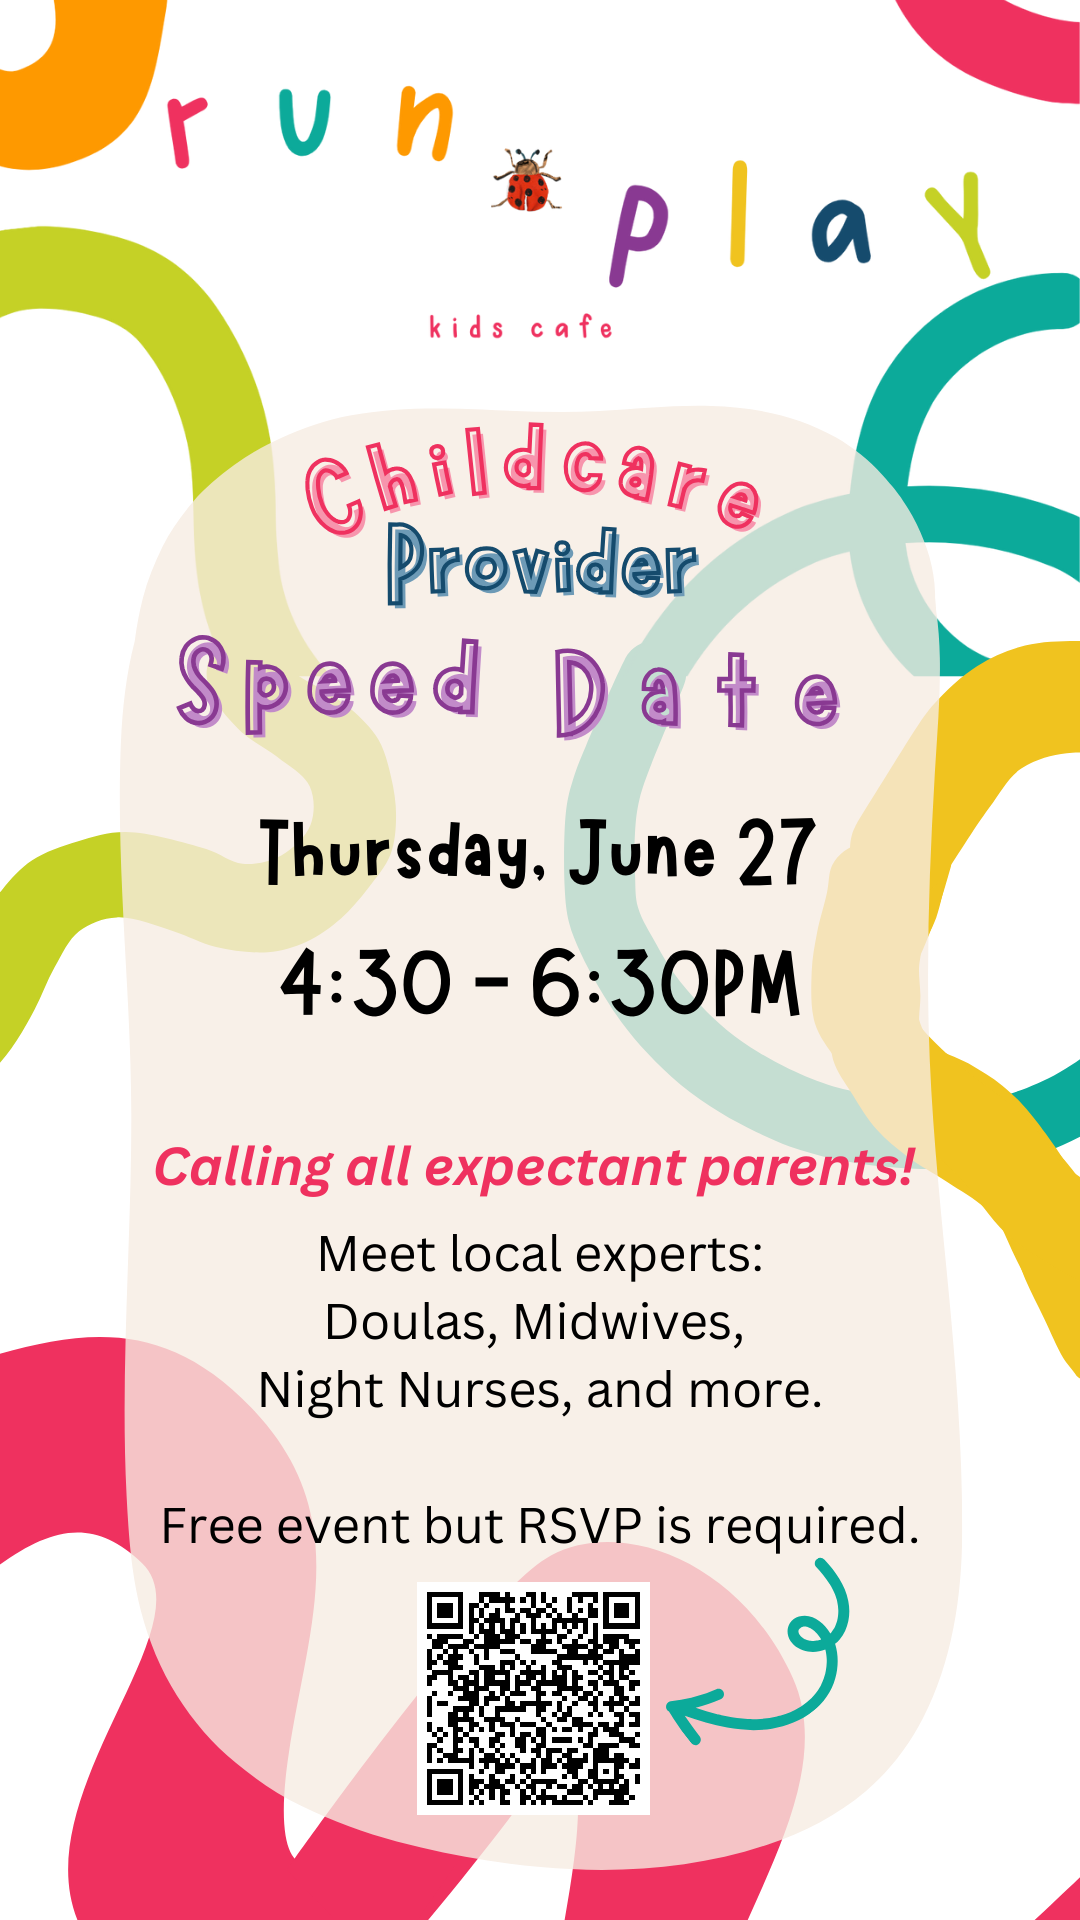 Childcare Provider Speed Dating